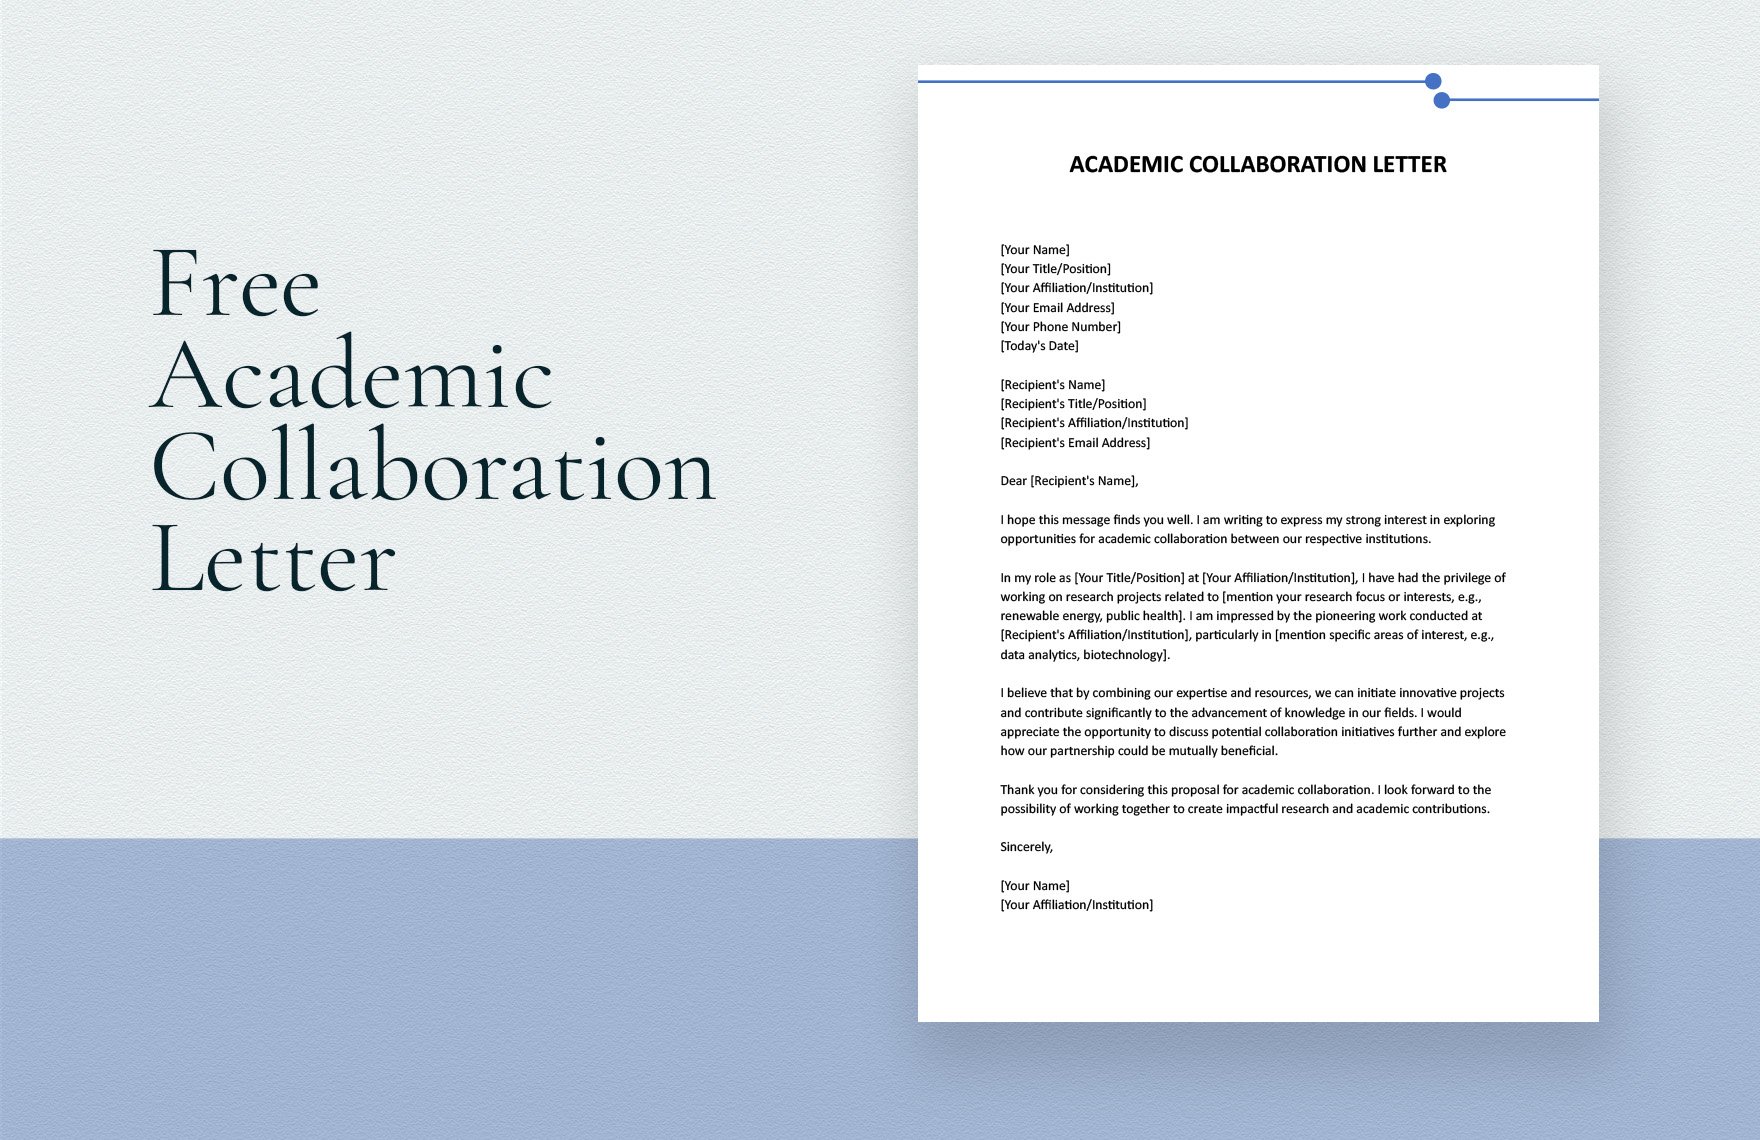 Academic Collaboration Letter in Word, Google Docs